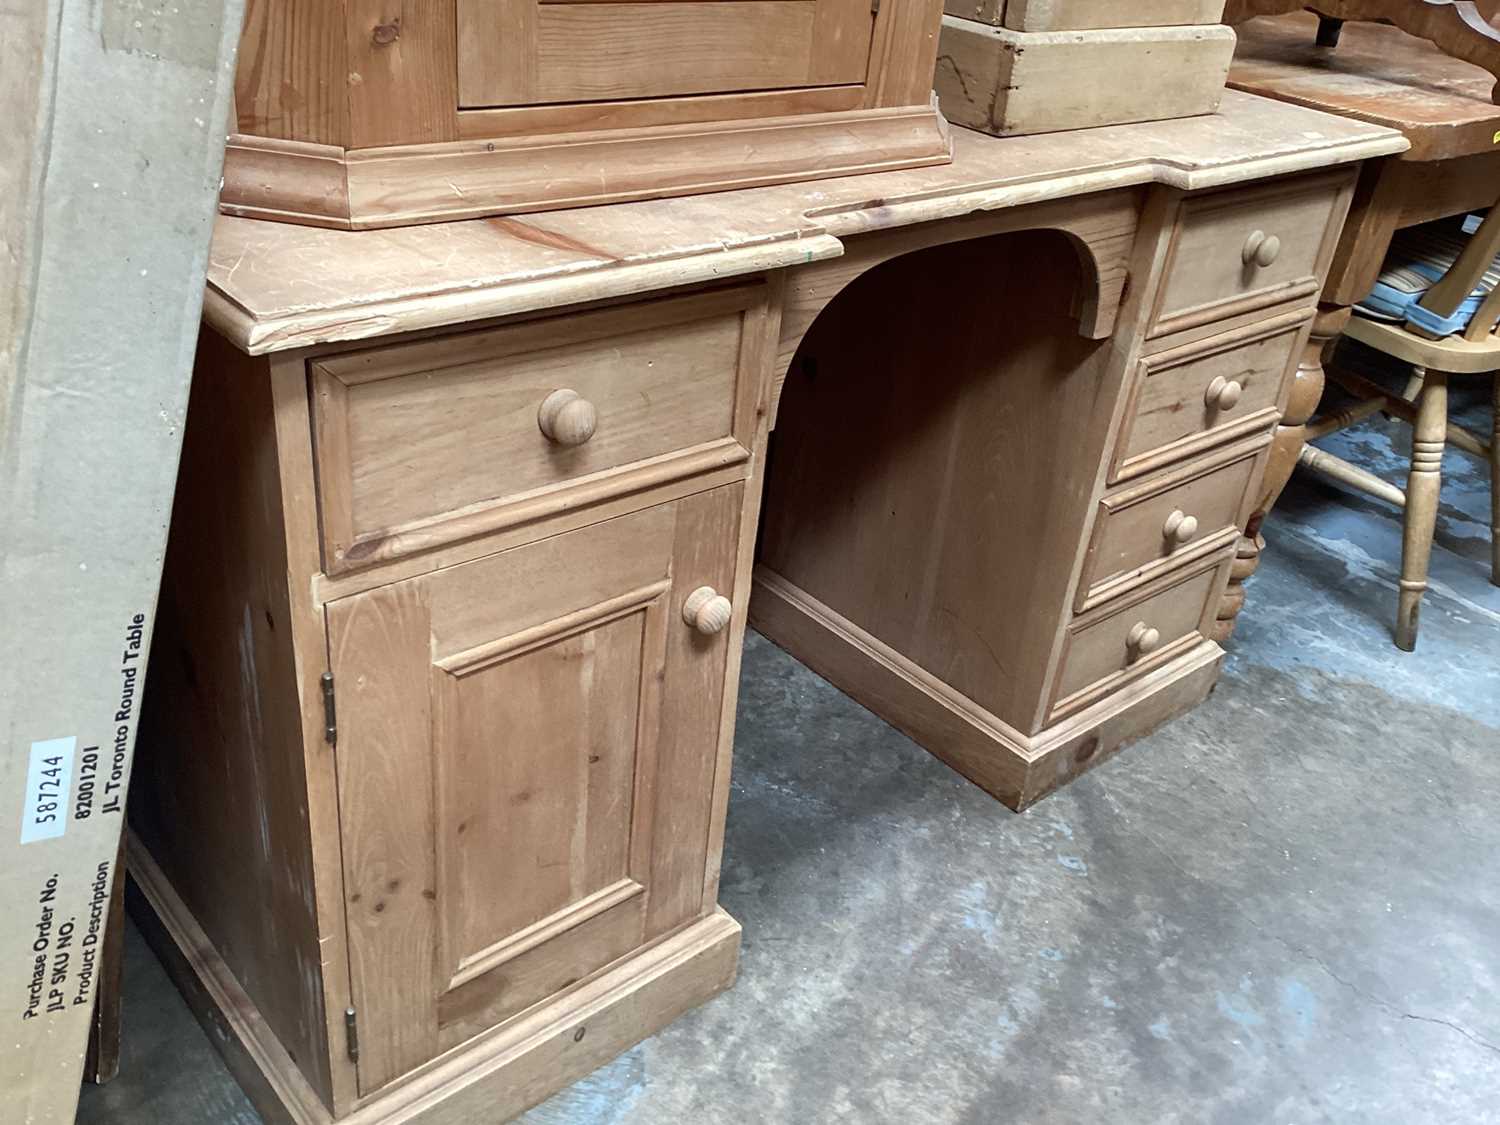 Pair of Victorian-style pine kneehole desks, each with five drawers and a single cupboard